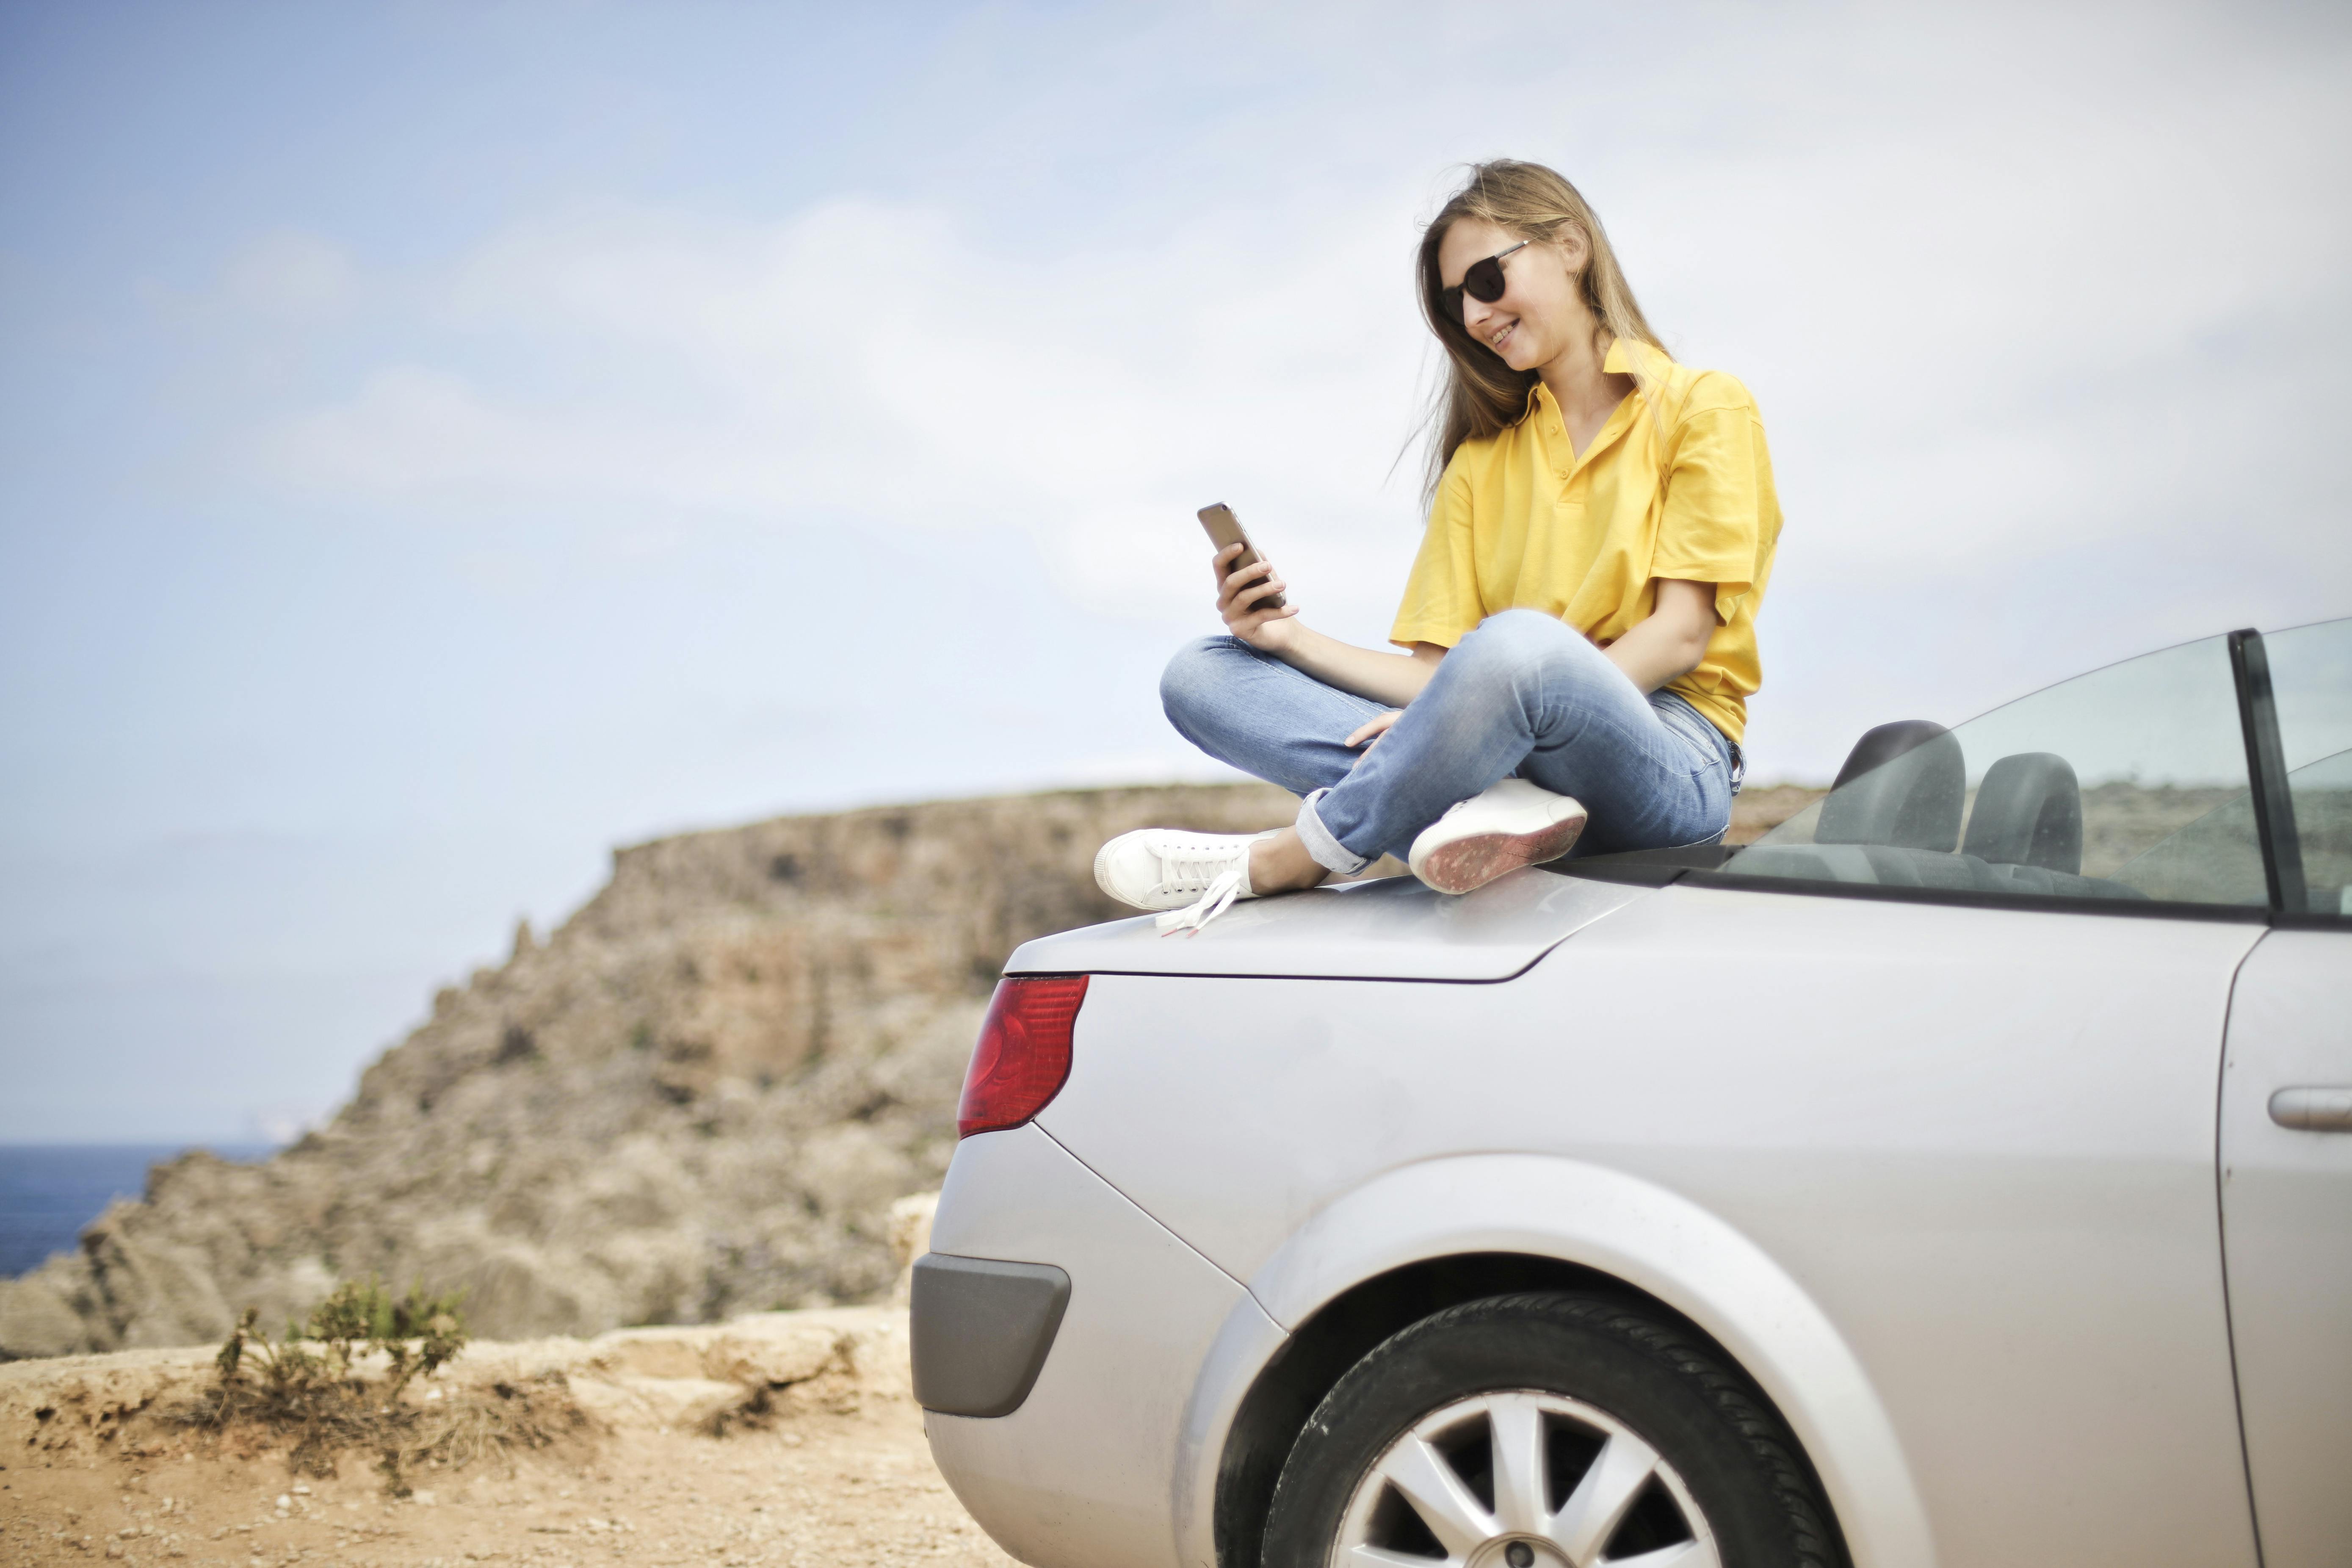 Smash schraper Pornografie Woman in Yellow Blouse and Blue Jeans Taking Selfie While Sitting on Car ·  Free Stock Photo